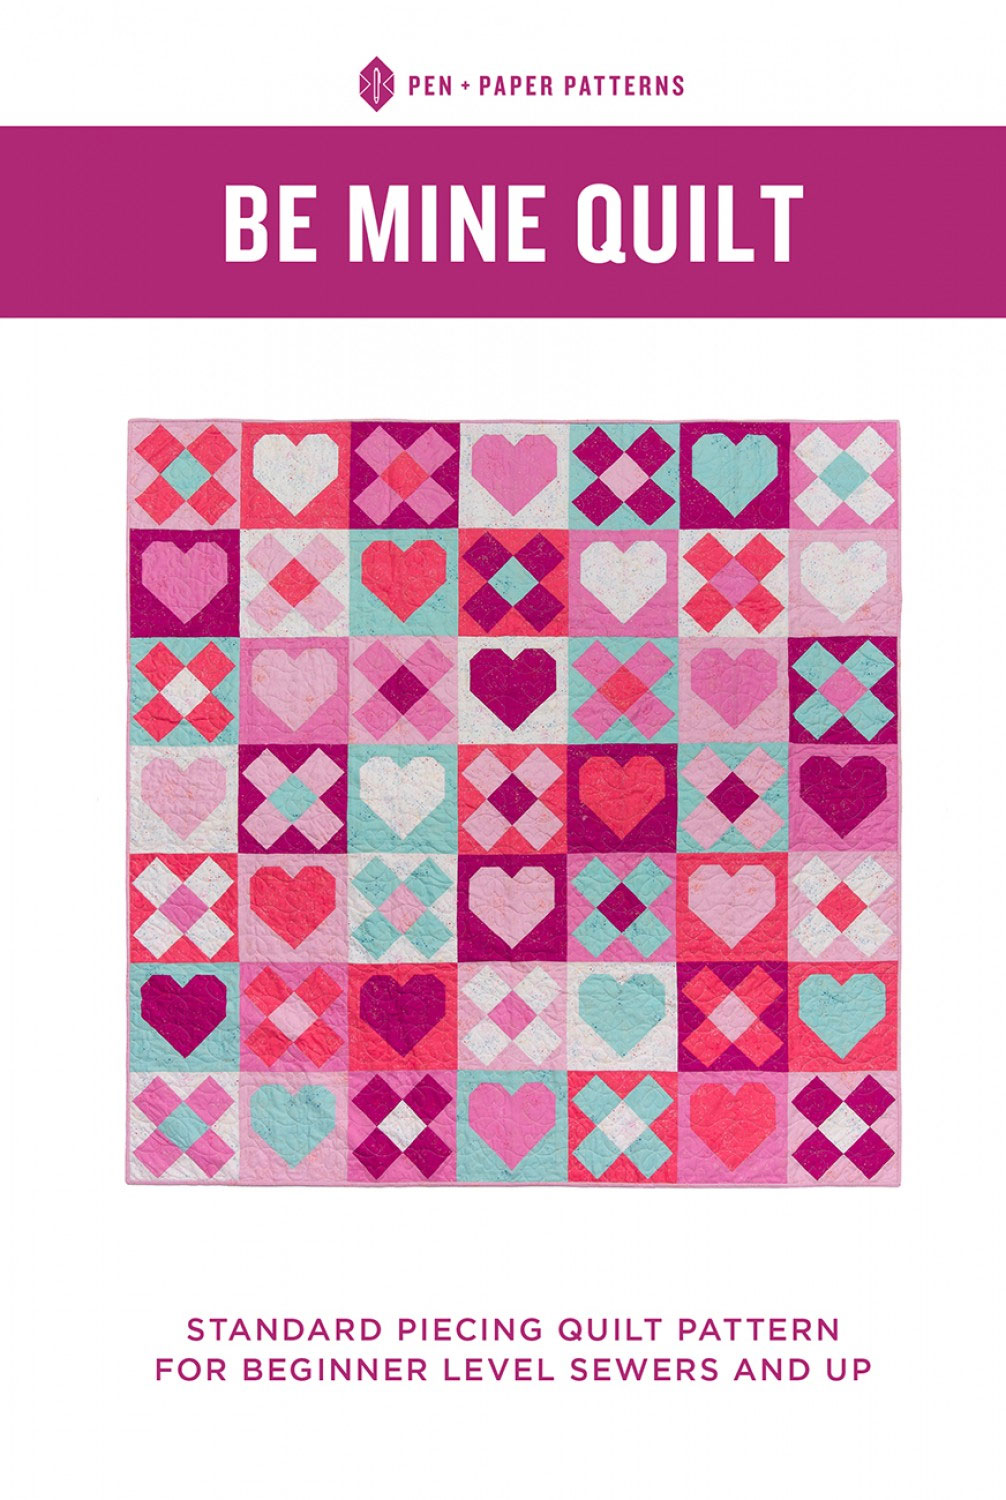 Be-Mine-quilt-sewing-pattern-from-Pen-plus-paper-patterns-front